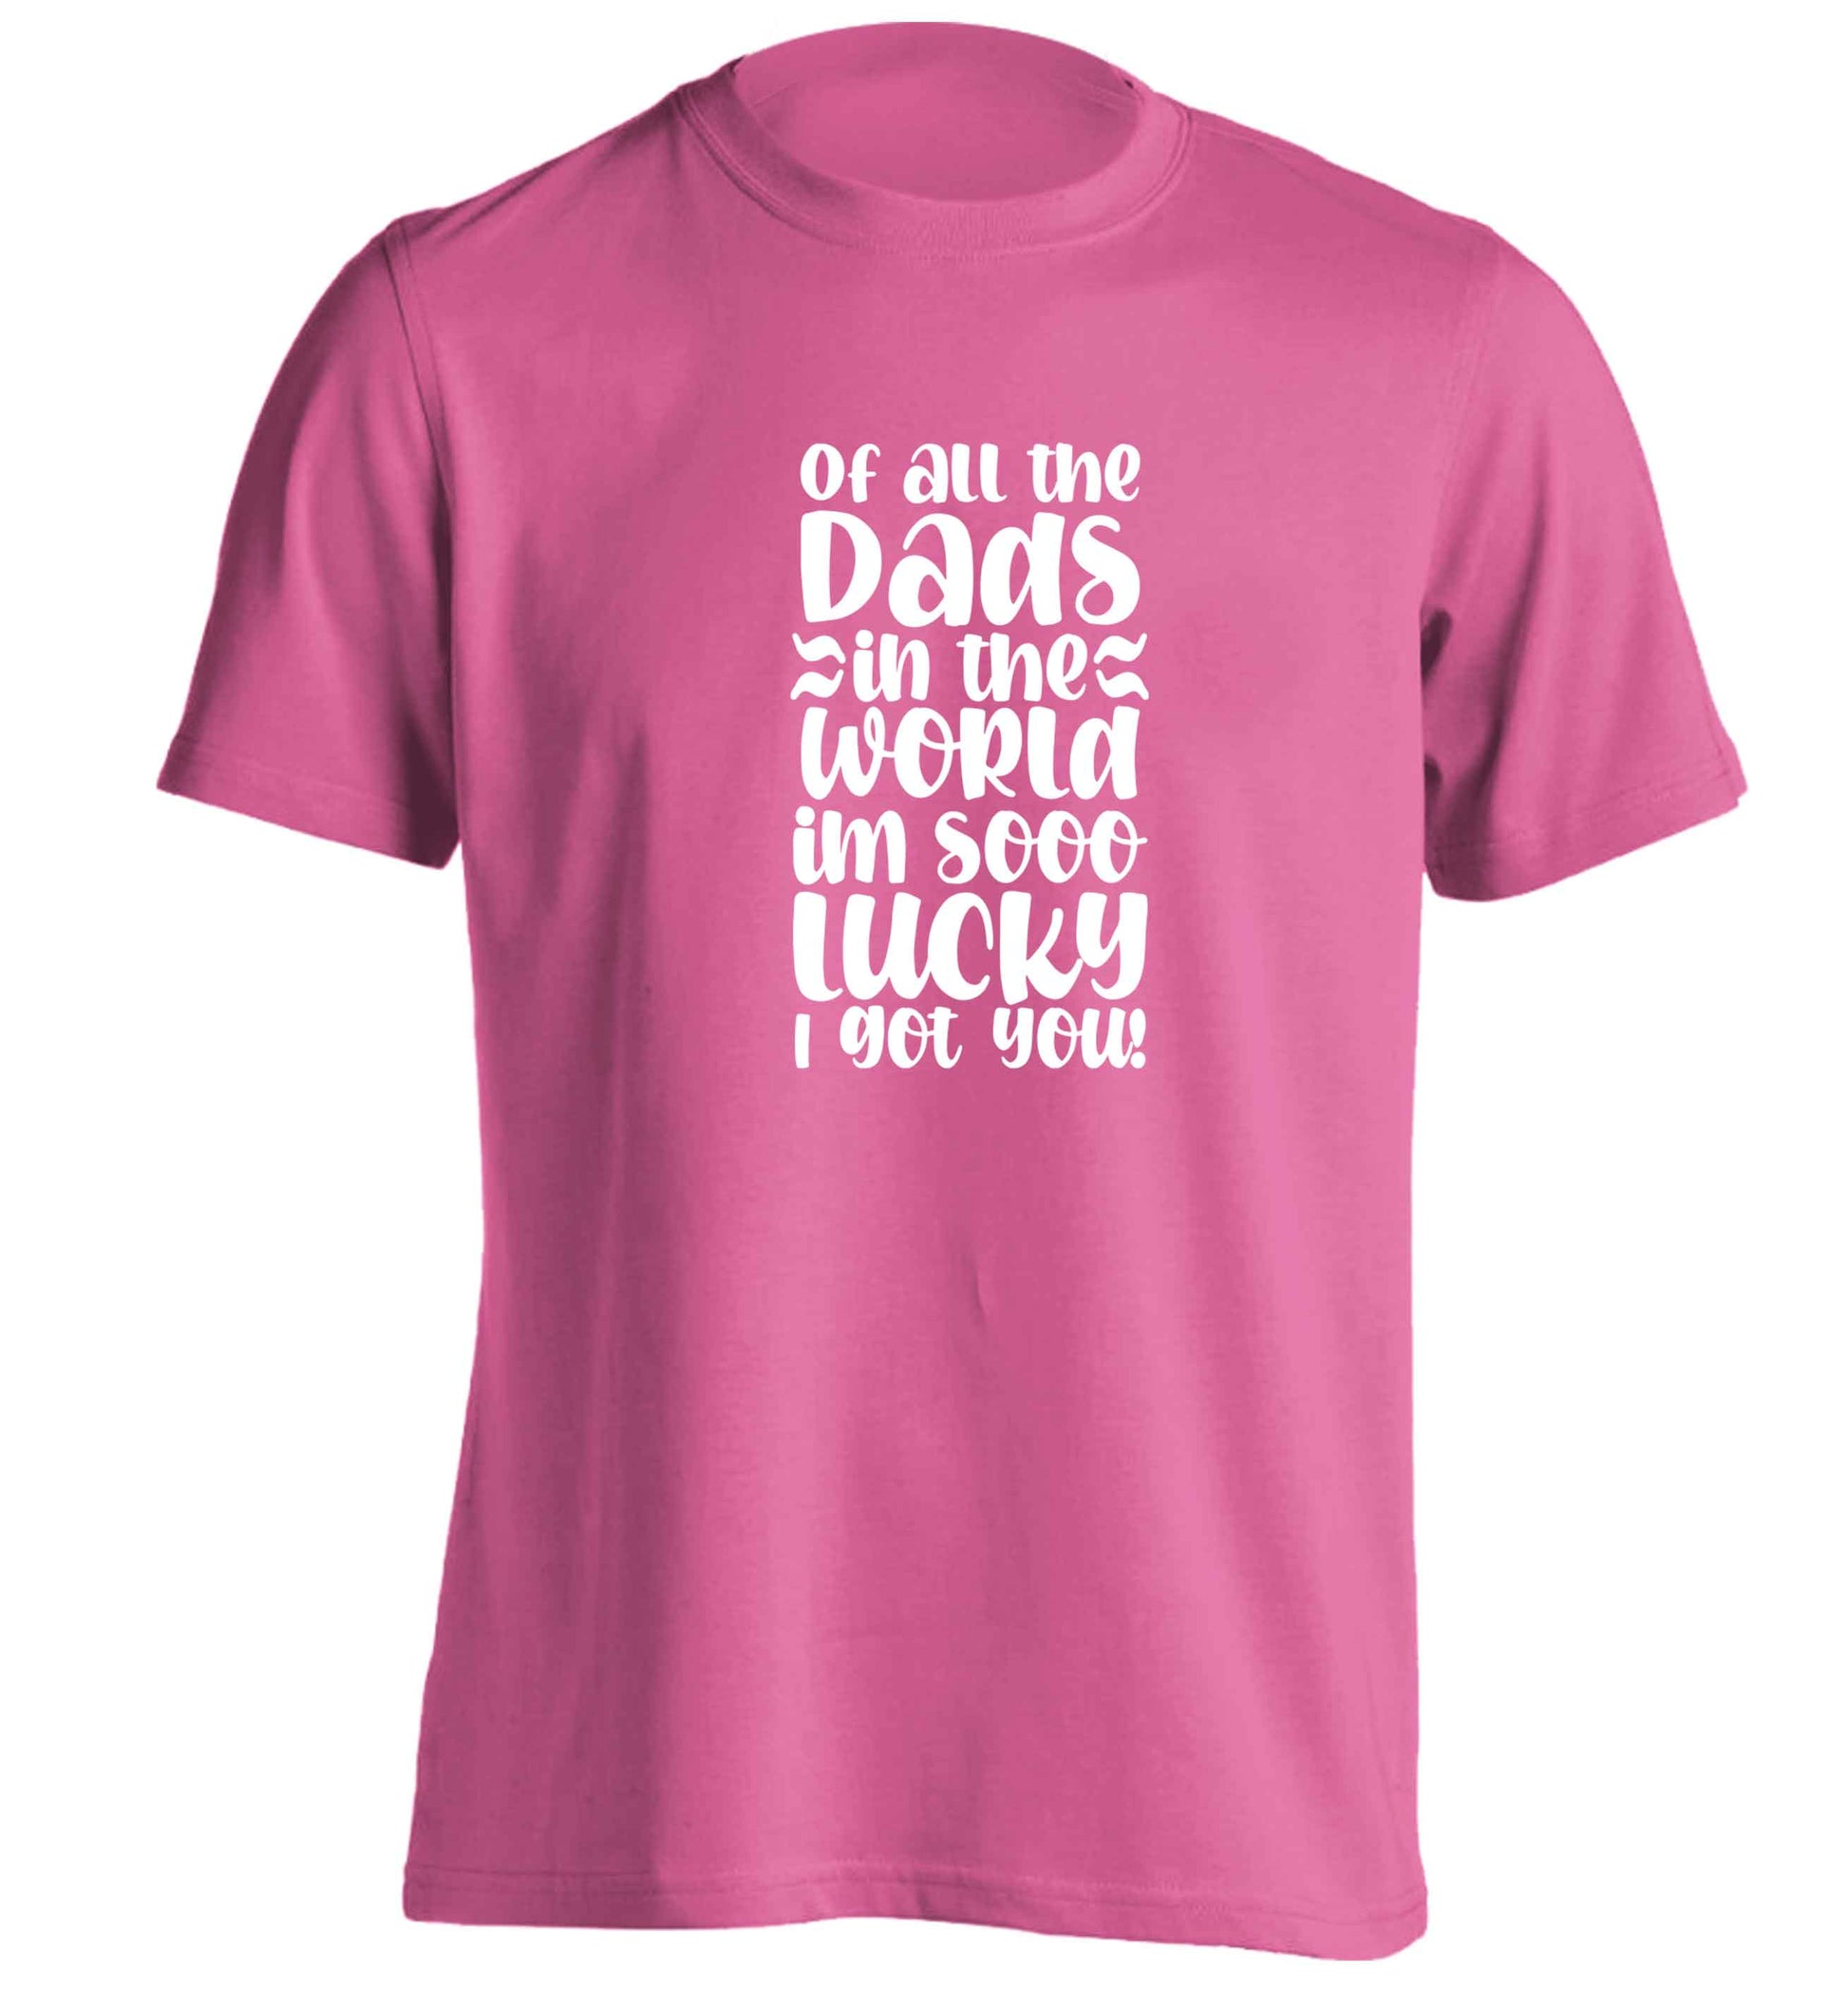 Of all the Dads in the world I'm so lucky I got you adults unisex pink Tshirt 2XL